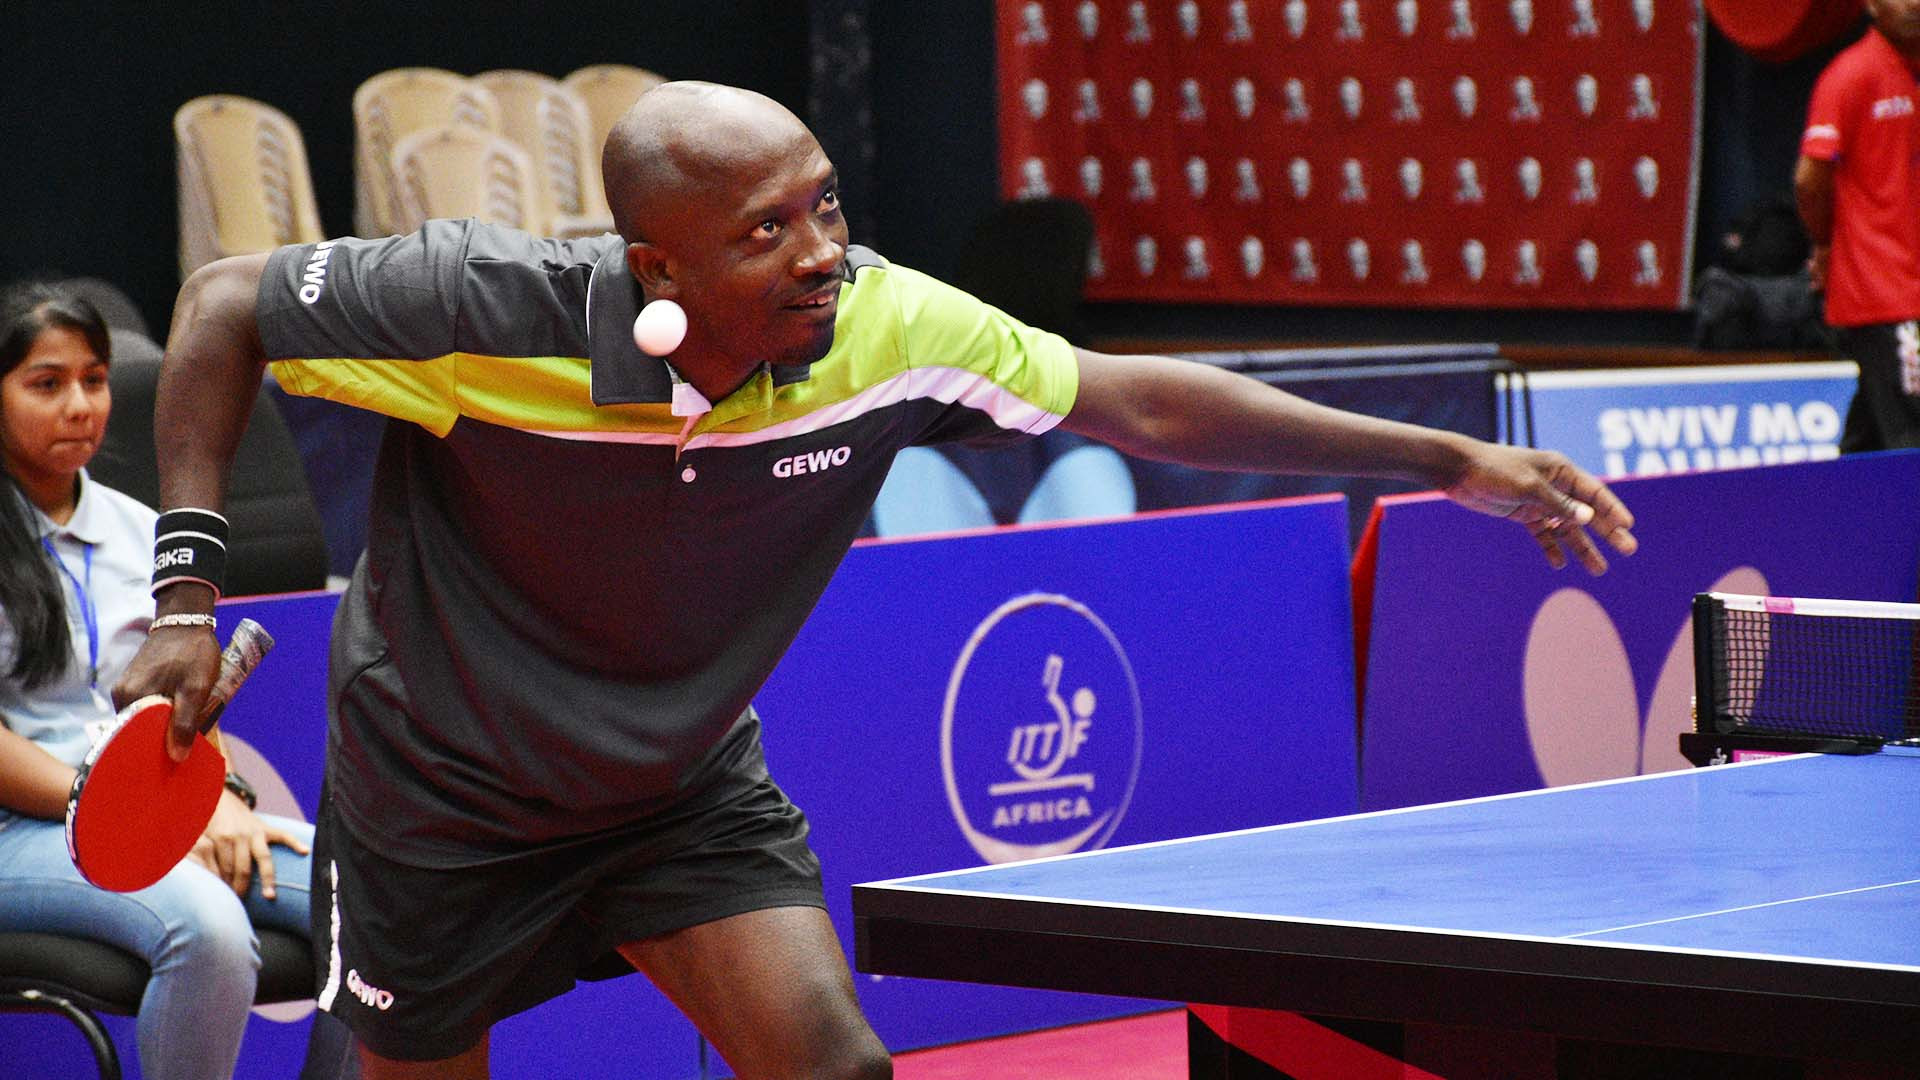 Nigeria and Egypt to clash for gold in men's and women's team events at African Table Tennis Championships